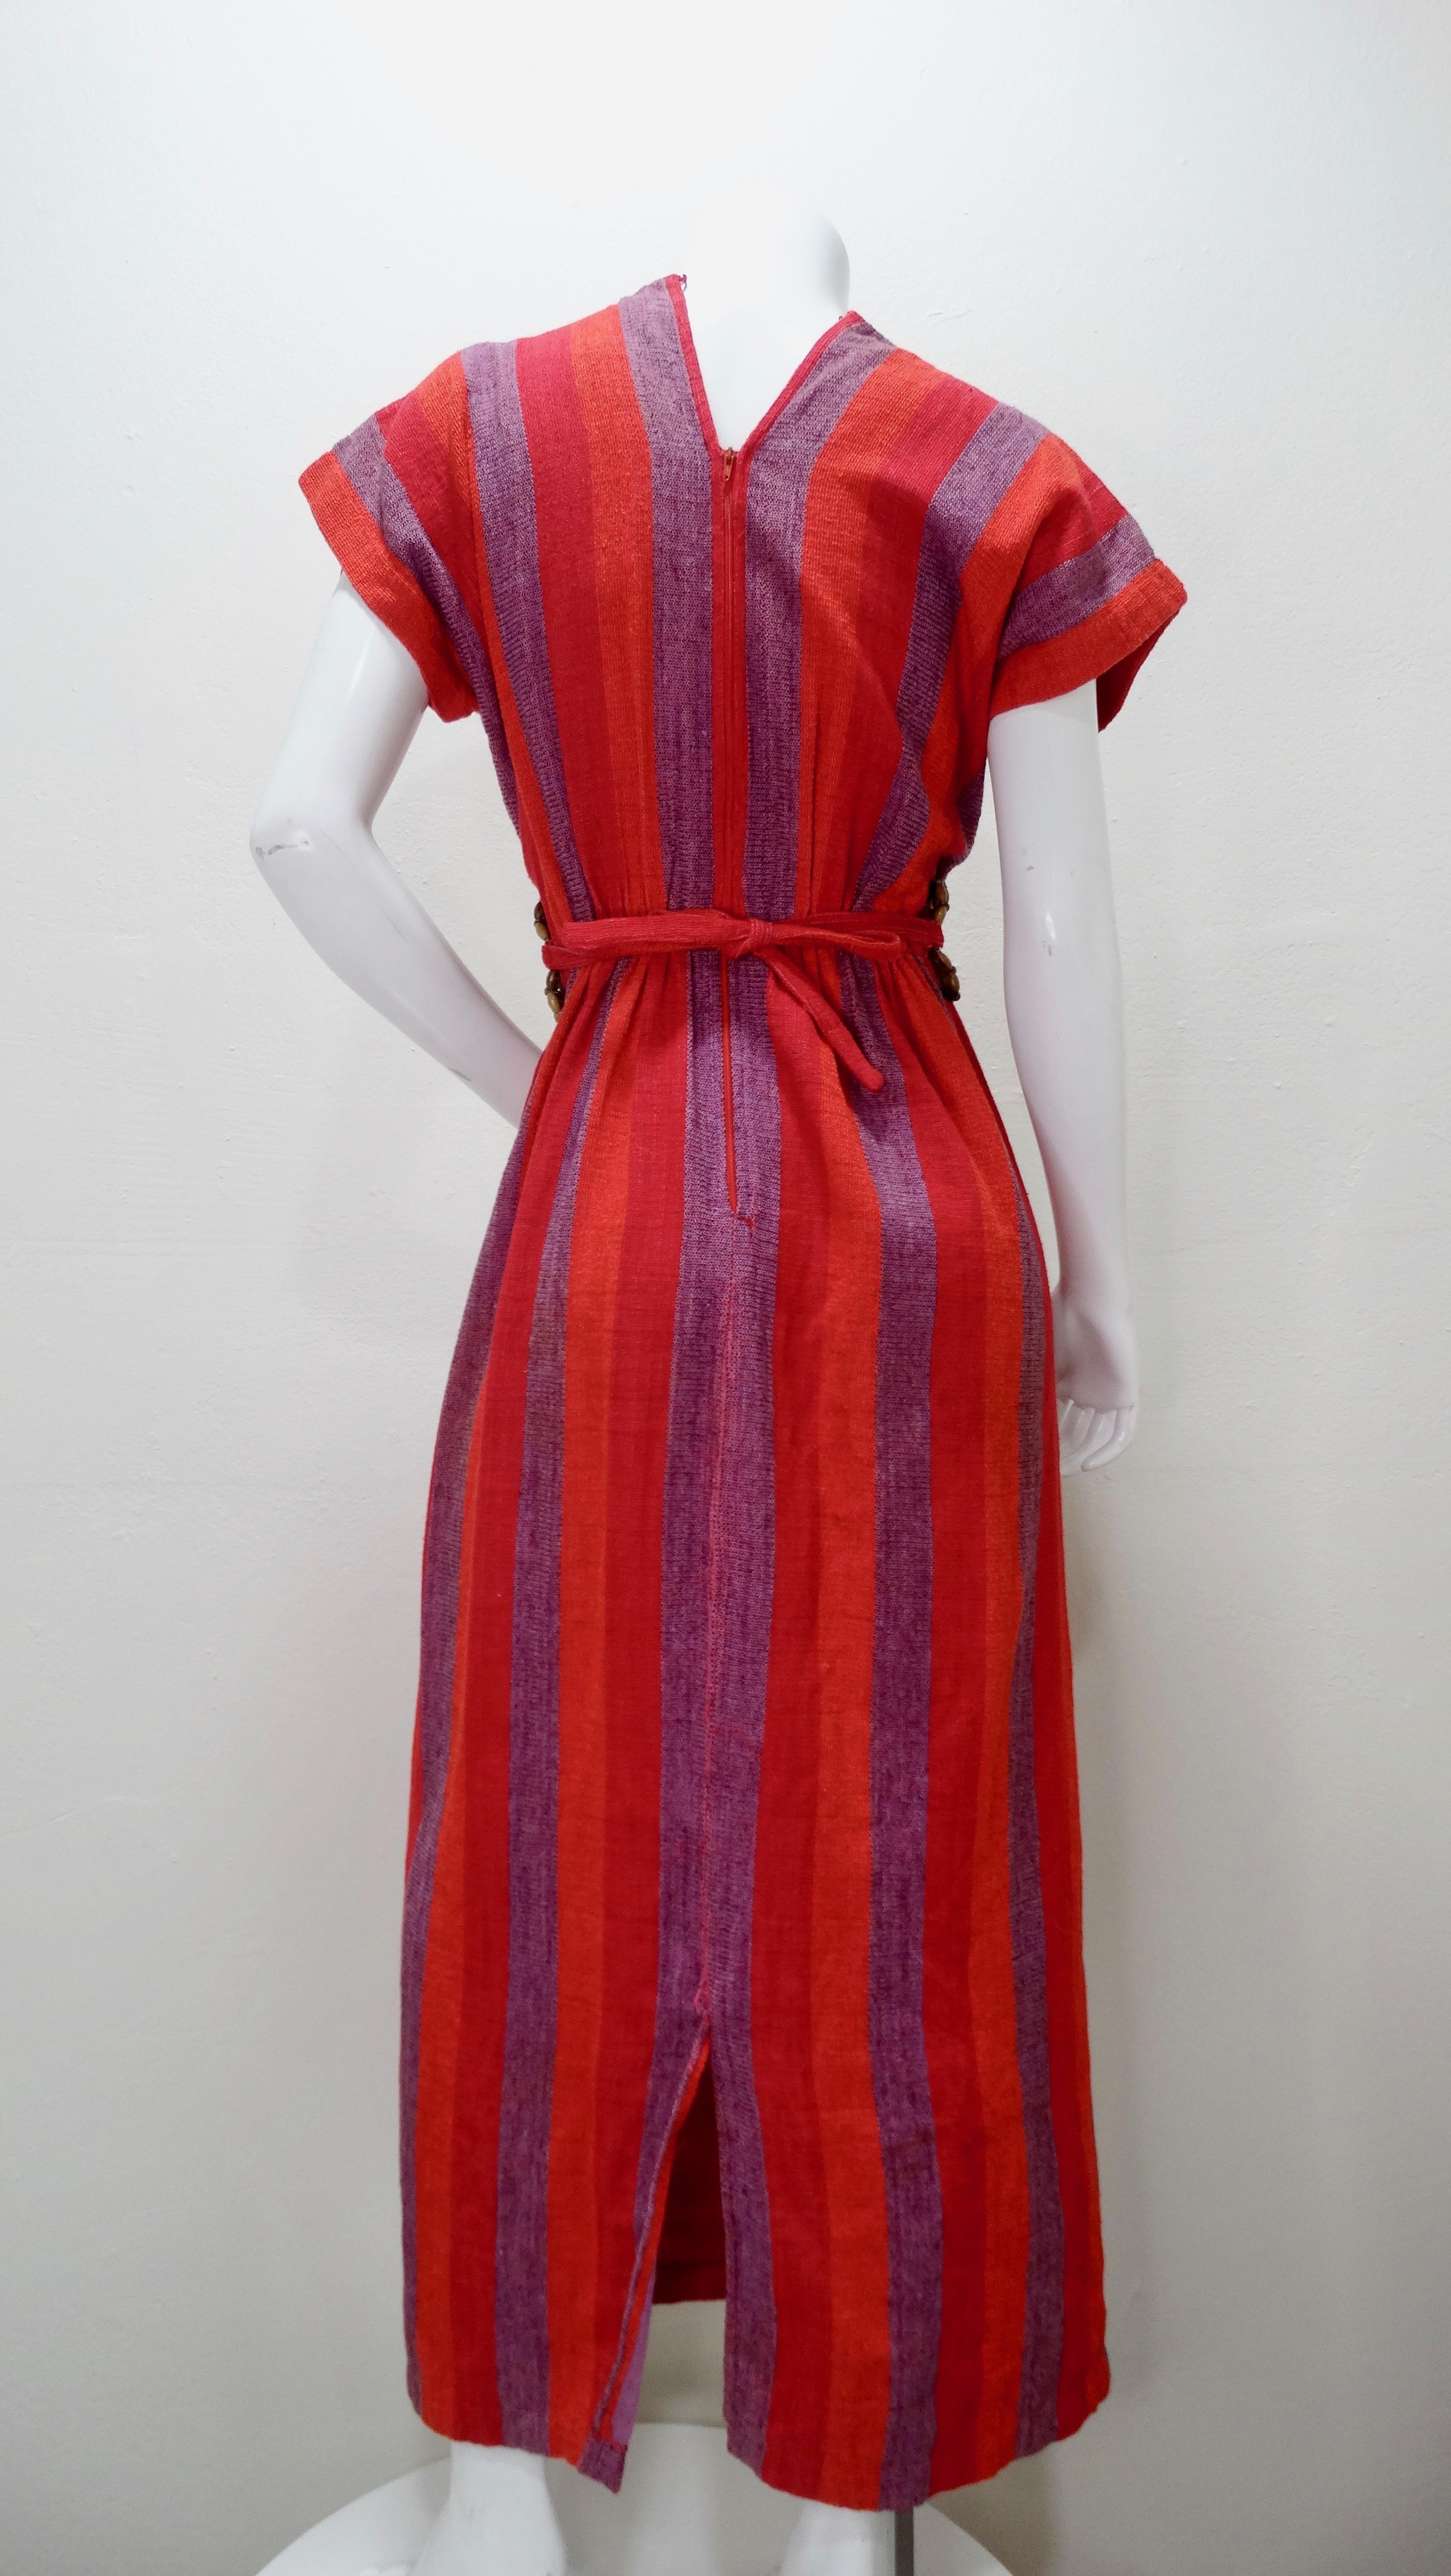 Rikma 1970s Wooden Macrame Striped Dress In Good Condition For Sale In Scottsdale, AZ